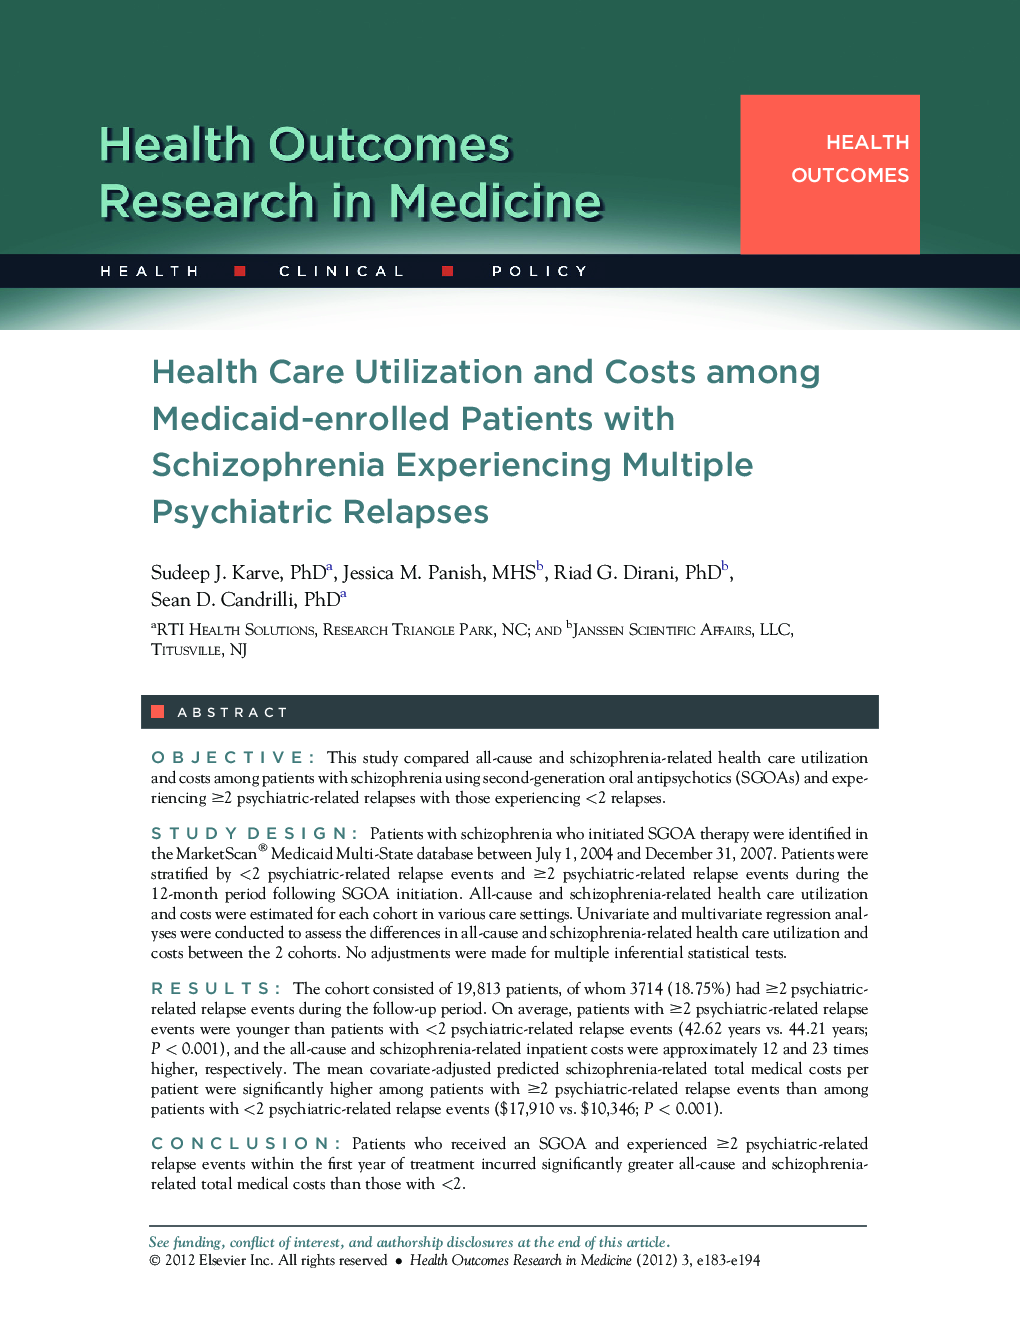 Health Care Utilization and Costs among Medicaid-enrolled Patients with Schizophrenia Experiencing Multiple Psychiatric Relapses 